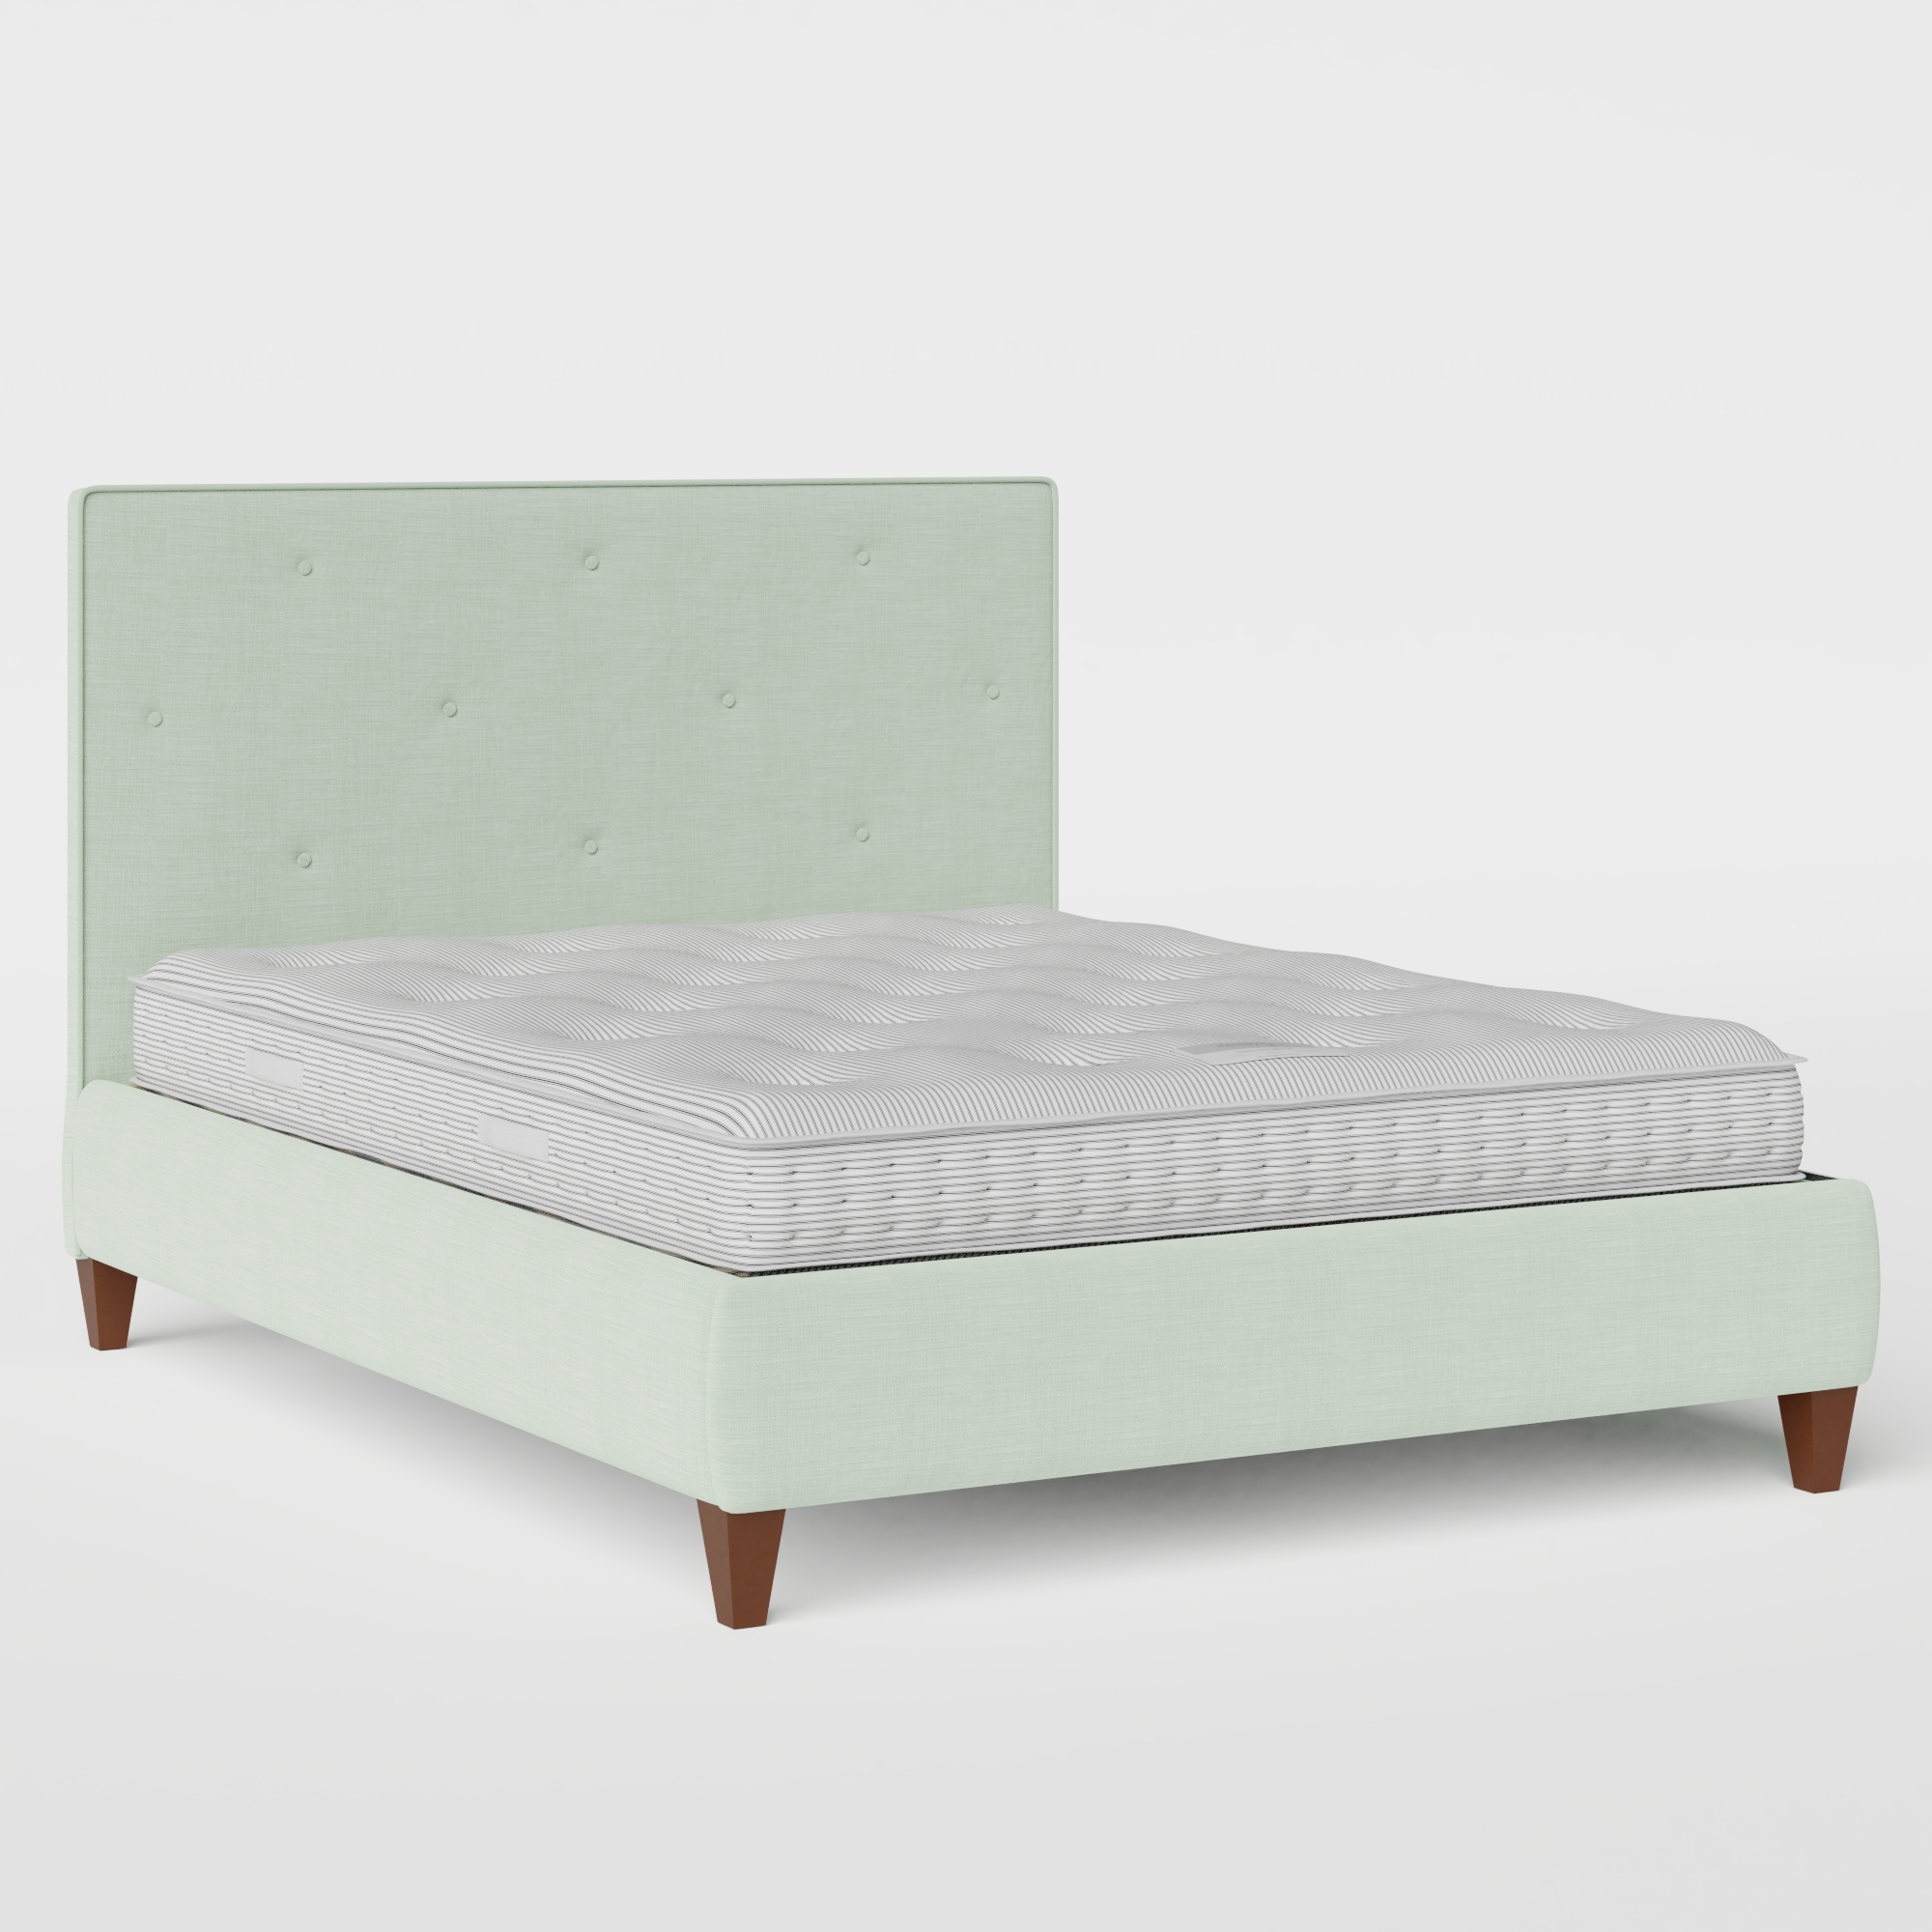 Yushan Buttoned Diagonal stoffen bed in duckegg